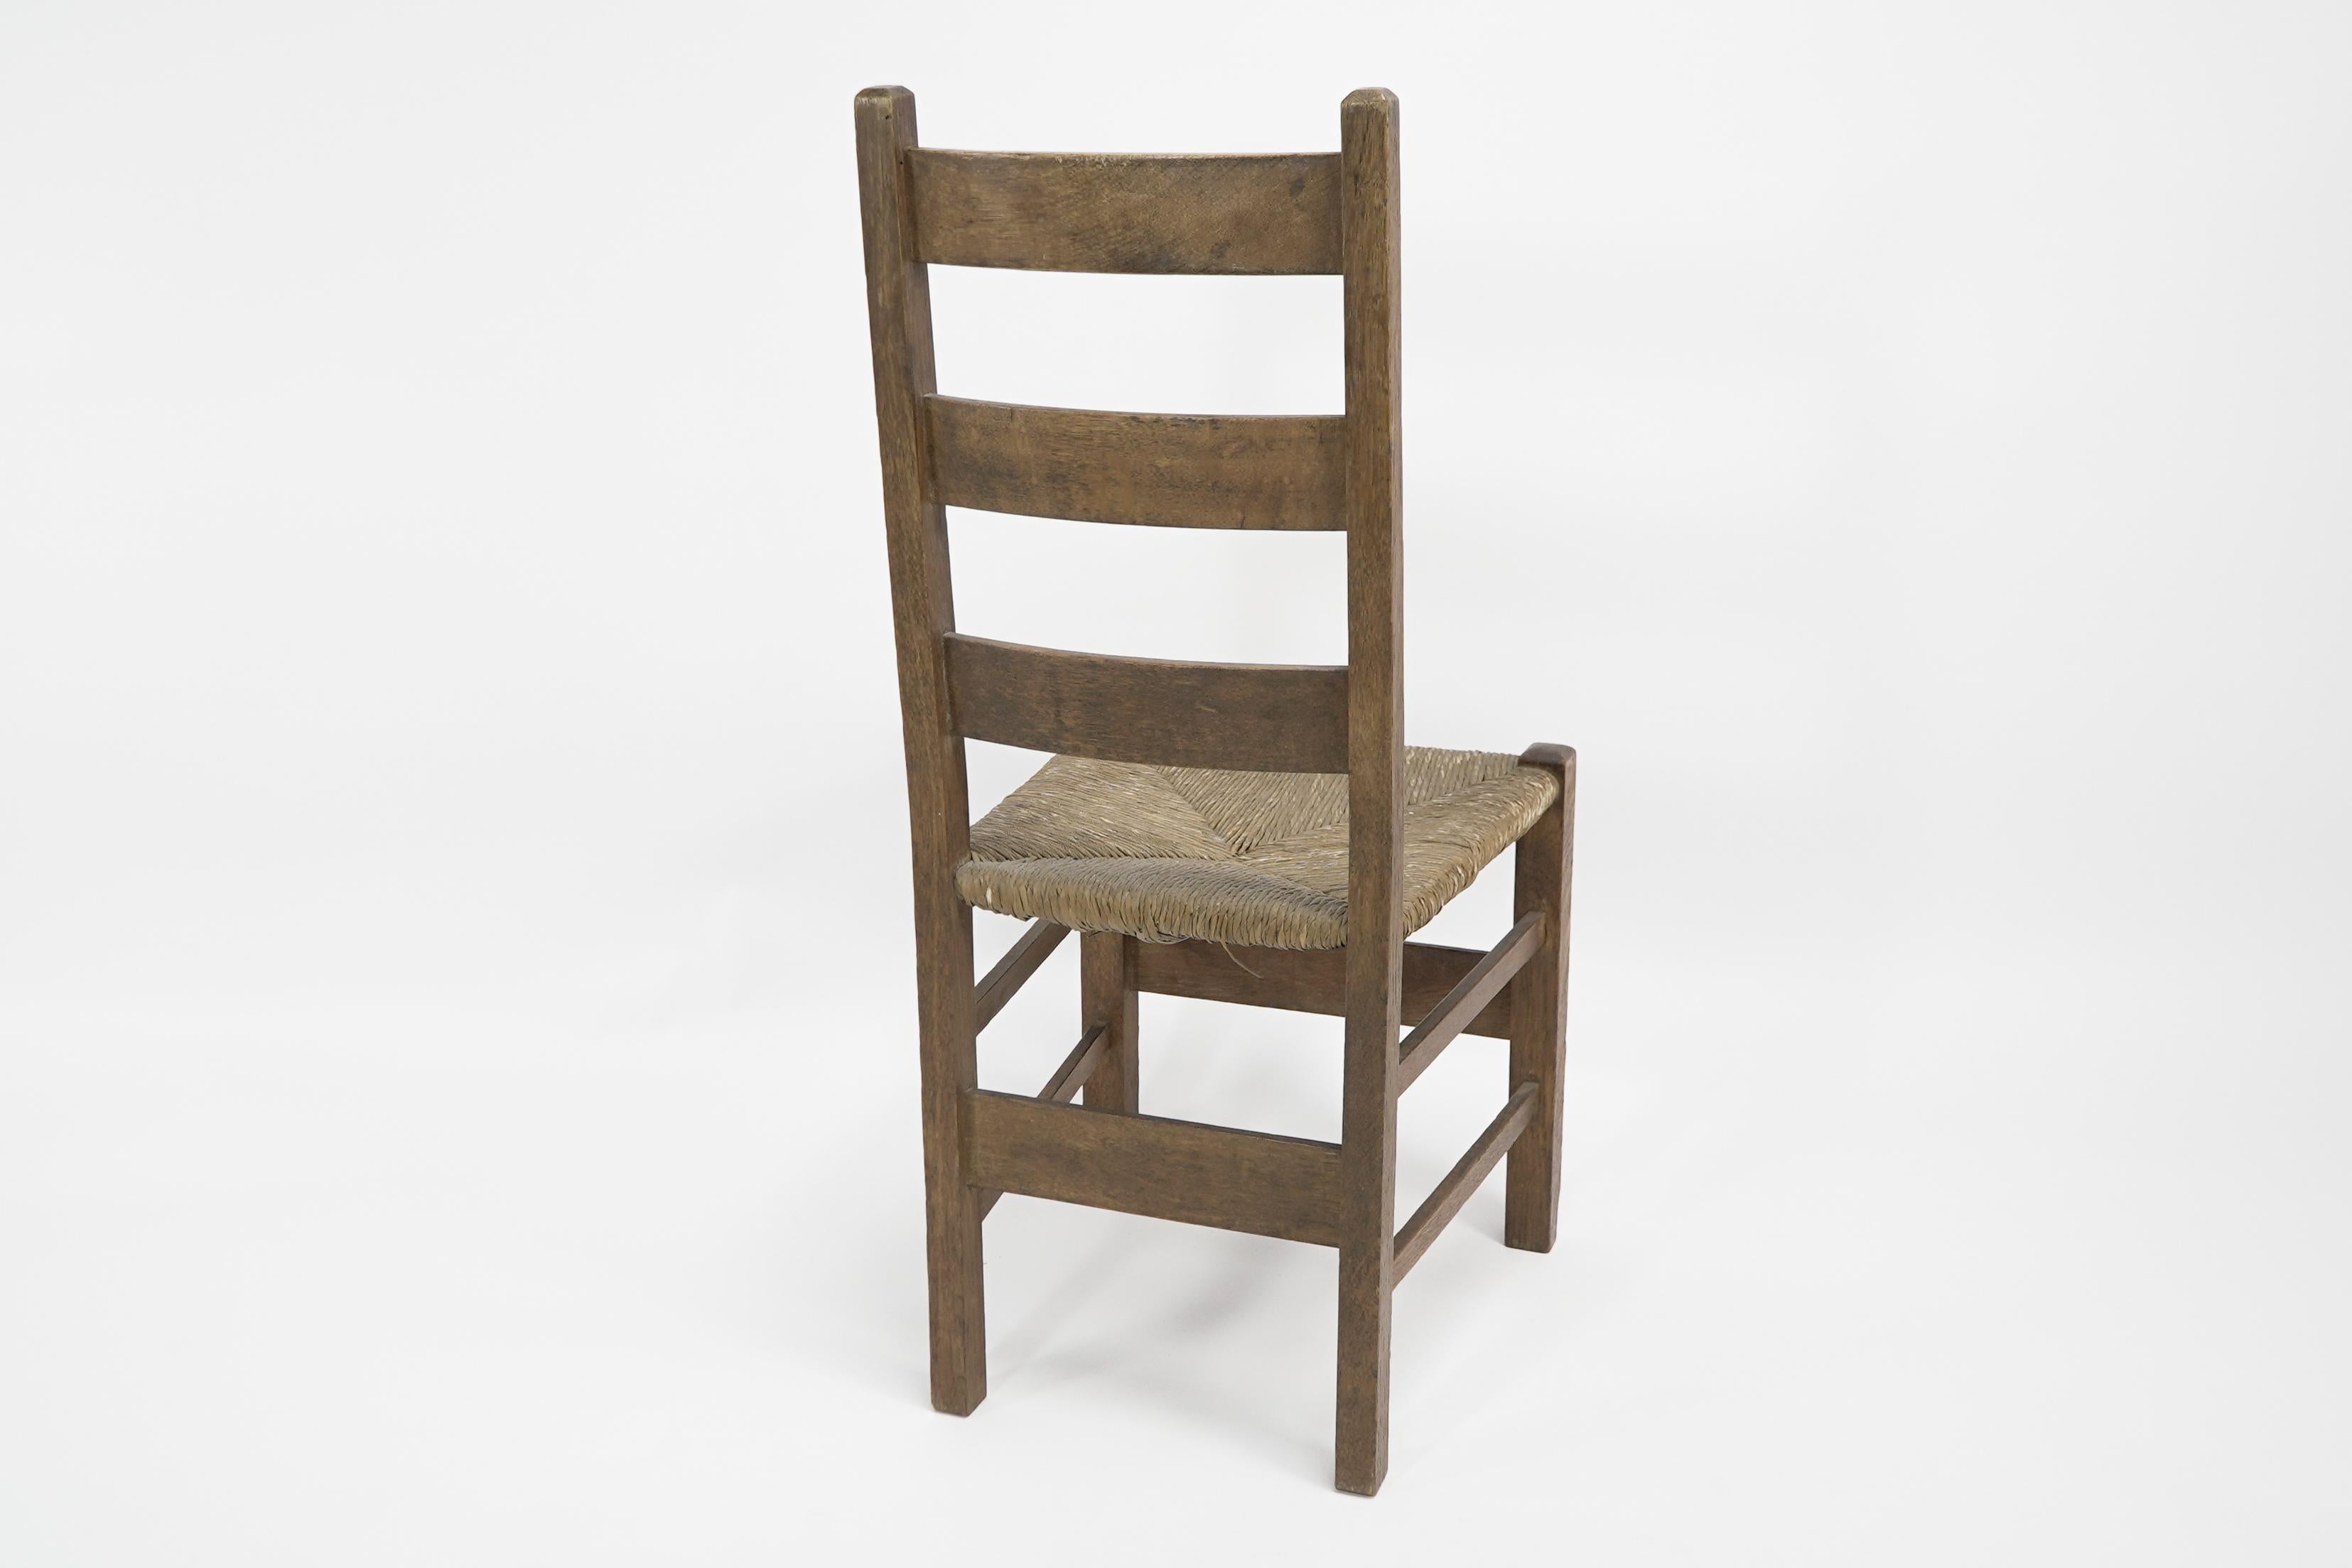 English Heals. London. An Arts and Crafts ladderback with original rush seat For Sale